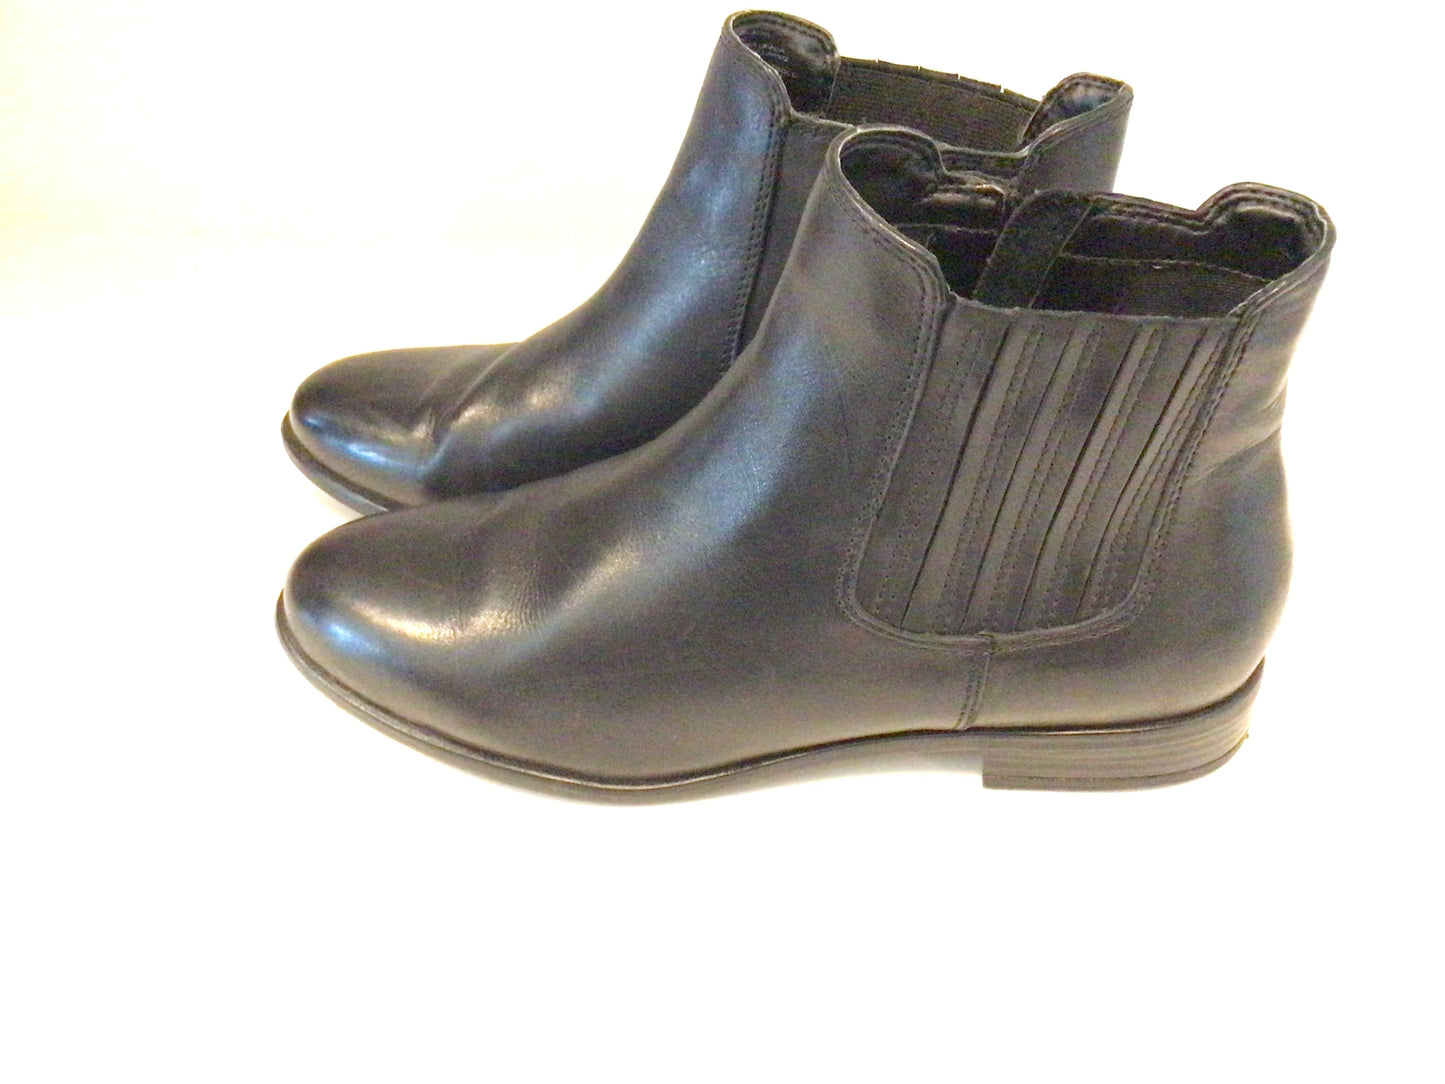 Consignment - 8880-2 Steve Madden black ankle boots sz 37